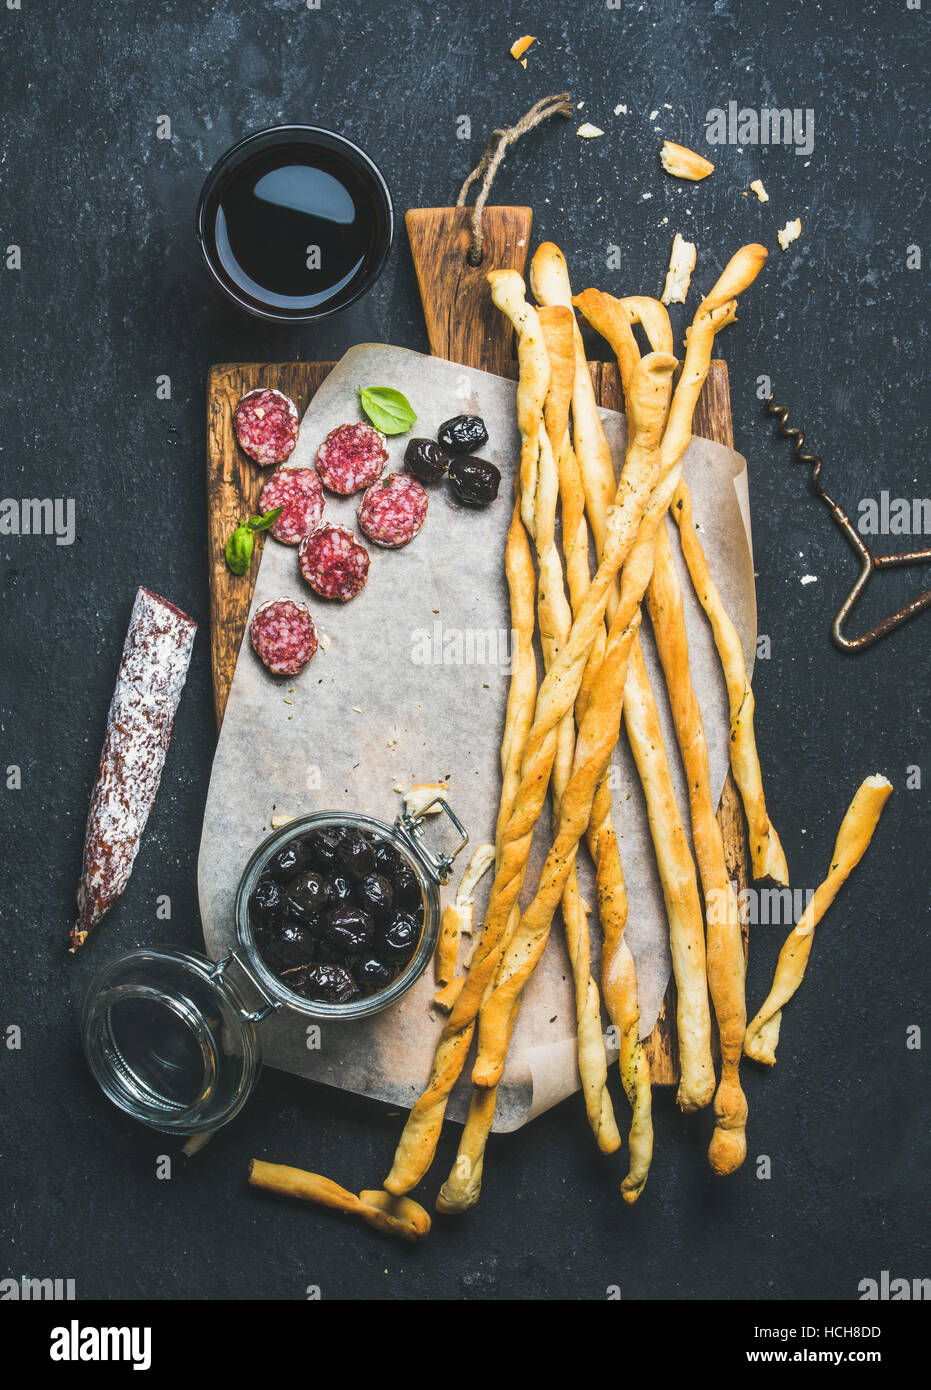 Wine and appetizers set. Italian Grissini bread sticks, dry cured pork meat sausage, black olives in jar and red wine in glass on wooden serving board Stock Photo